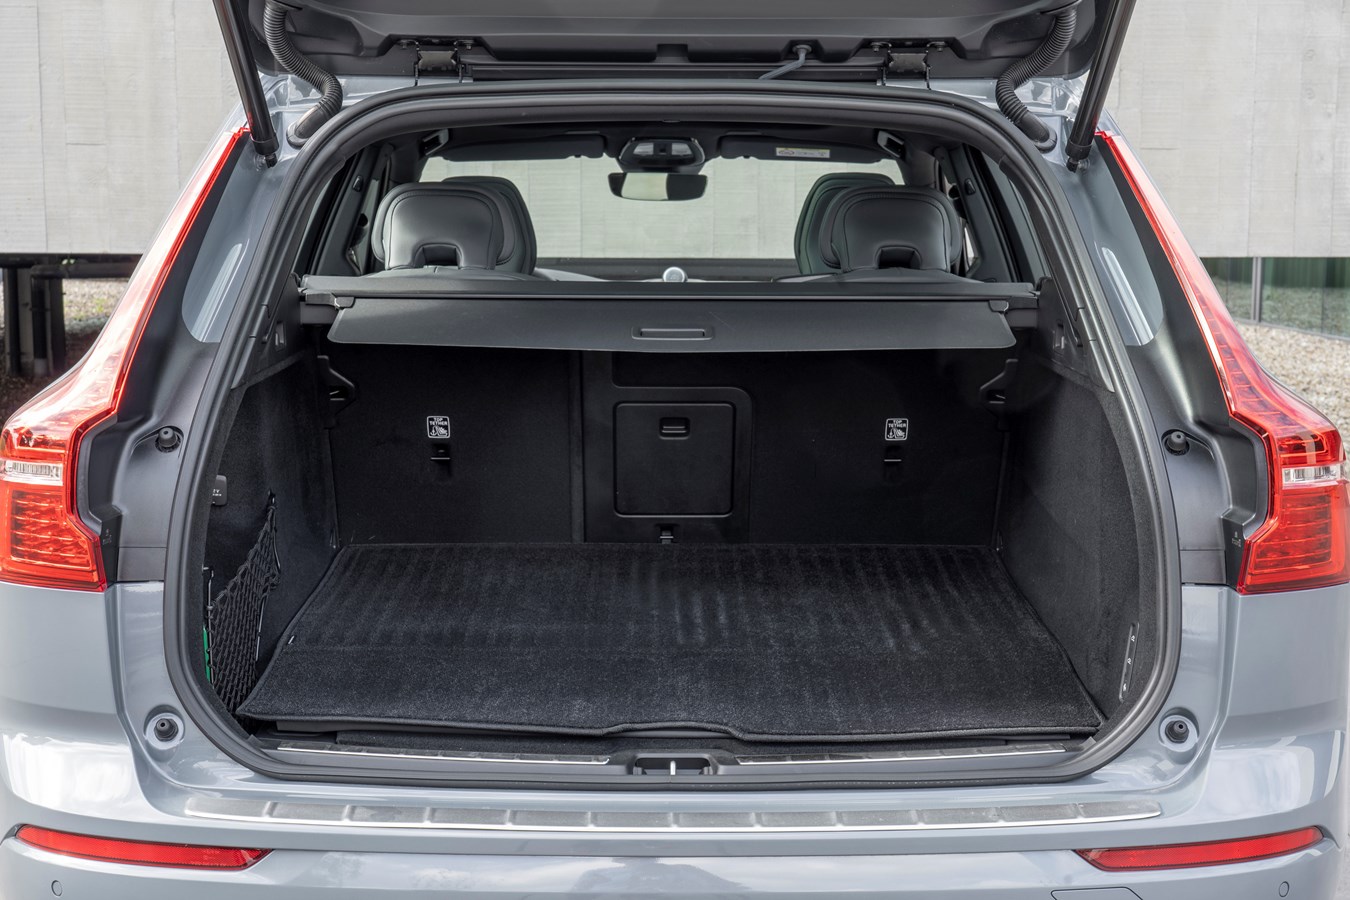 Volvo XC60 trunk space